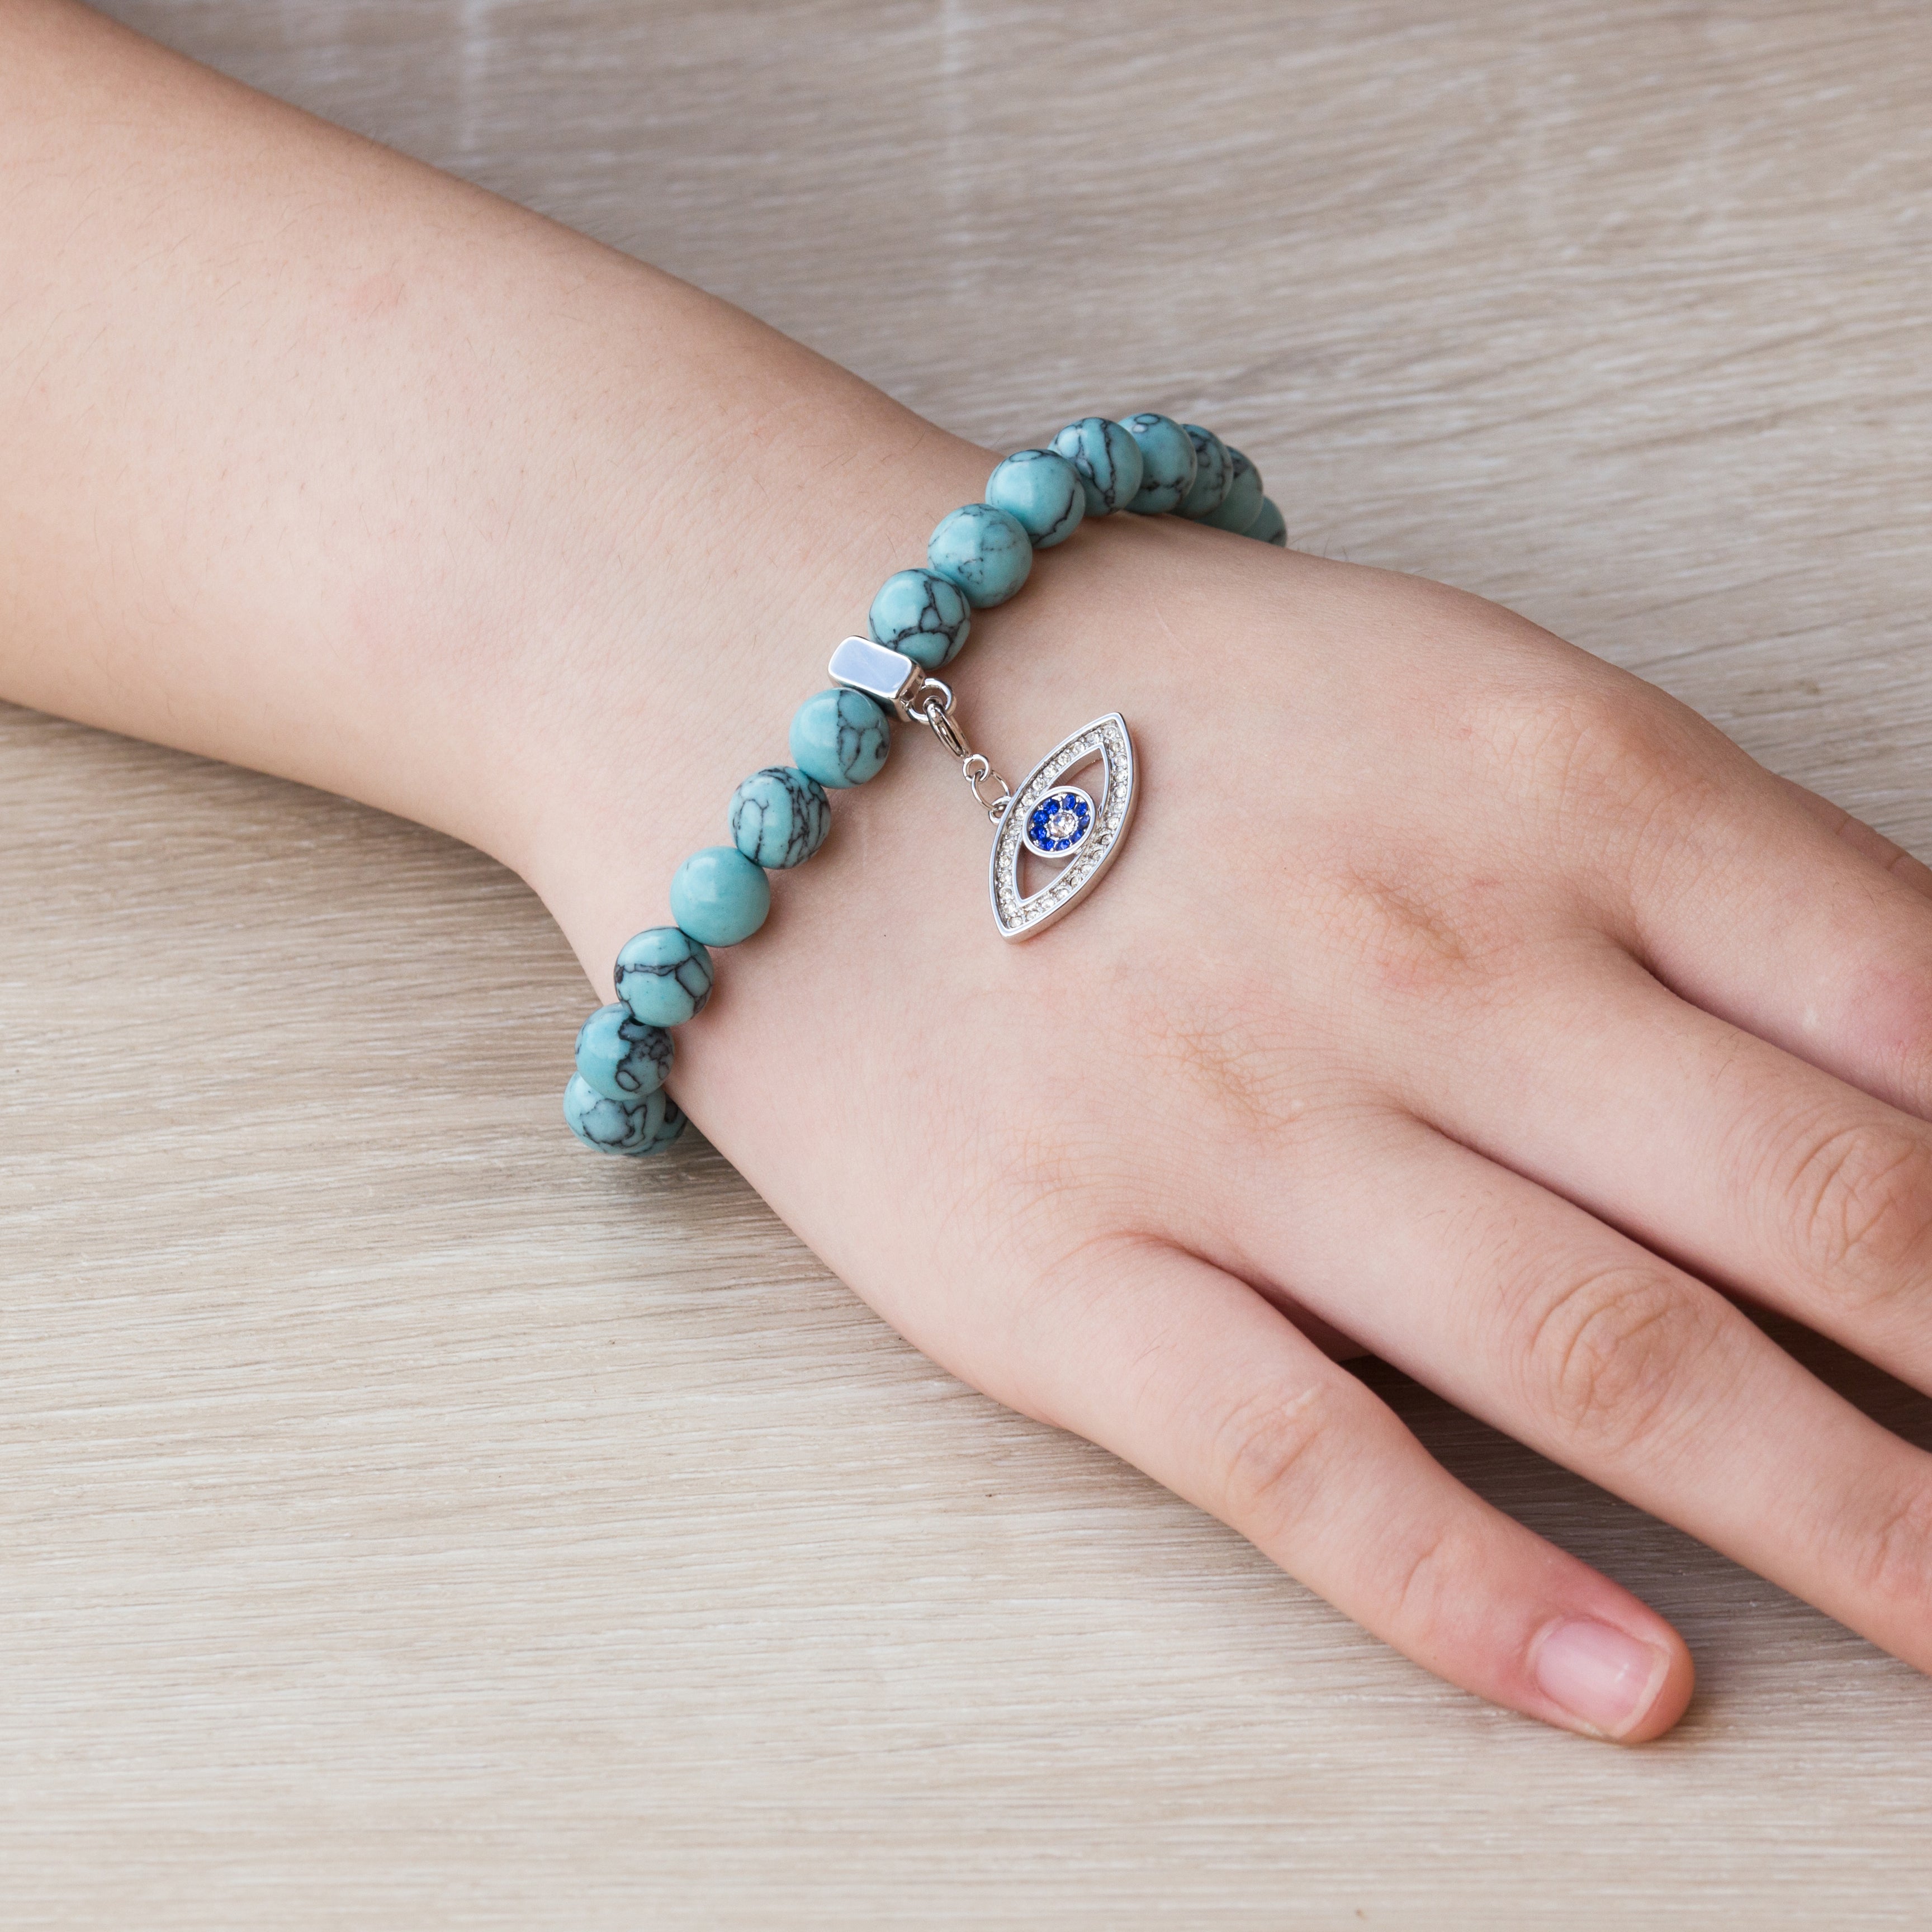 Synthetic Turquoise Gemstone Stretch Bracelet with Charm Created with Zircondia® Crystals